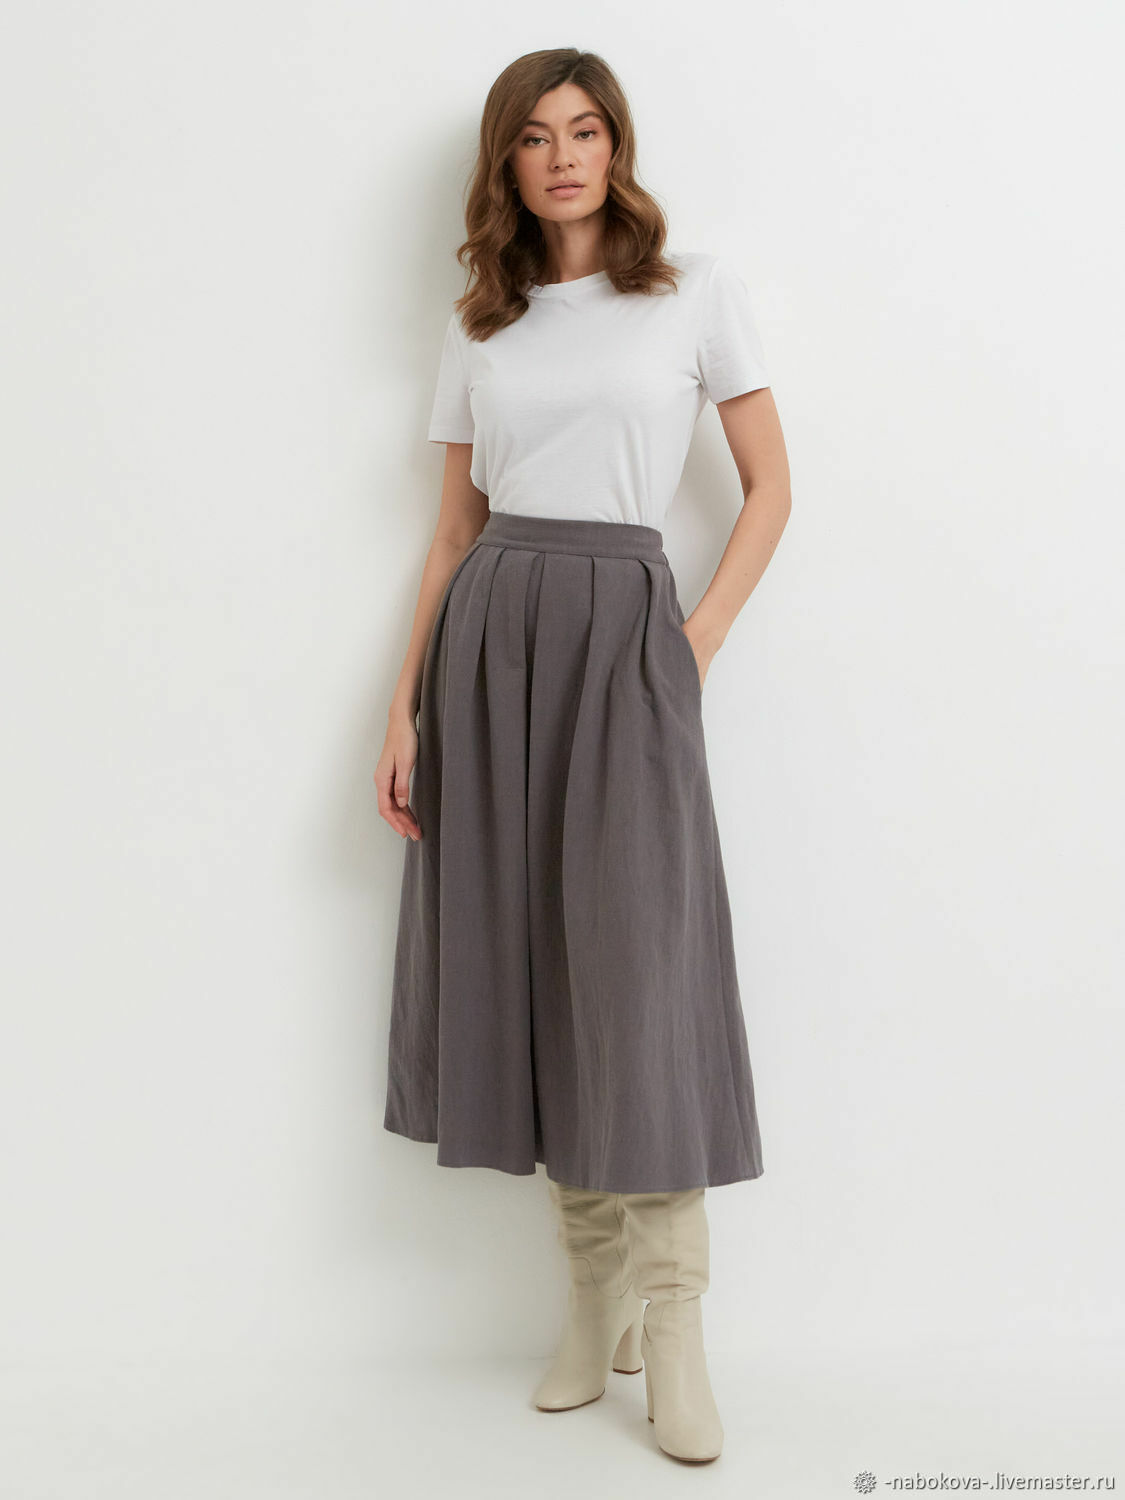 Grey nettle skirt below the knees, Skirts, Moscow,  Фото №1